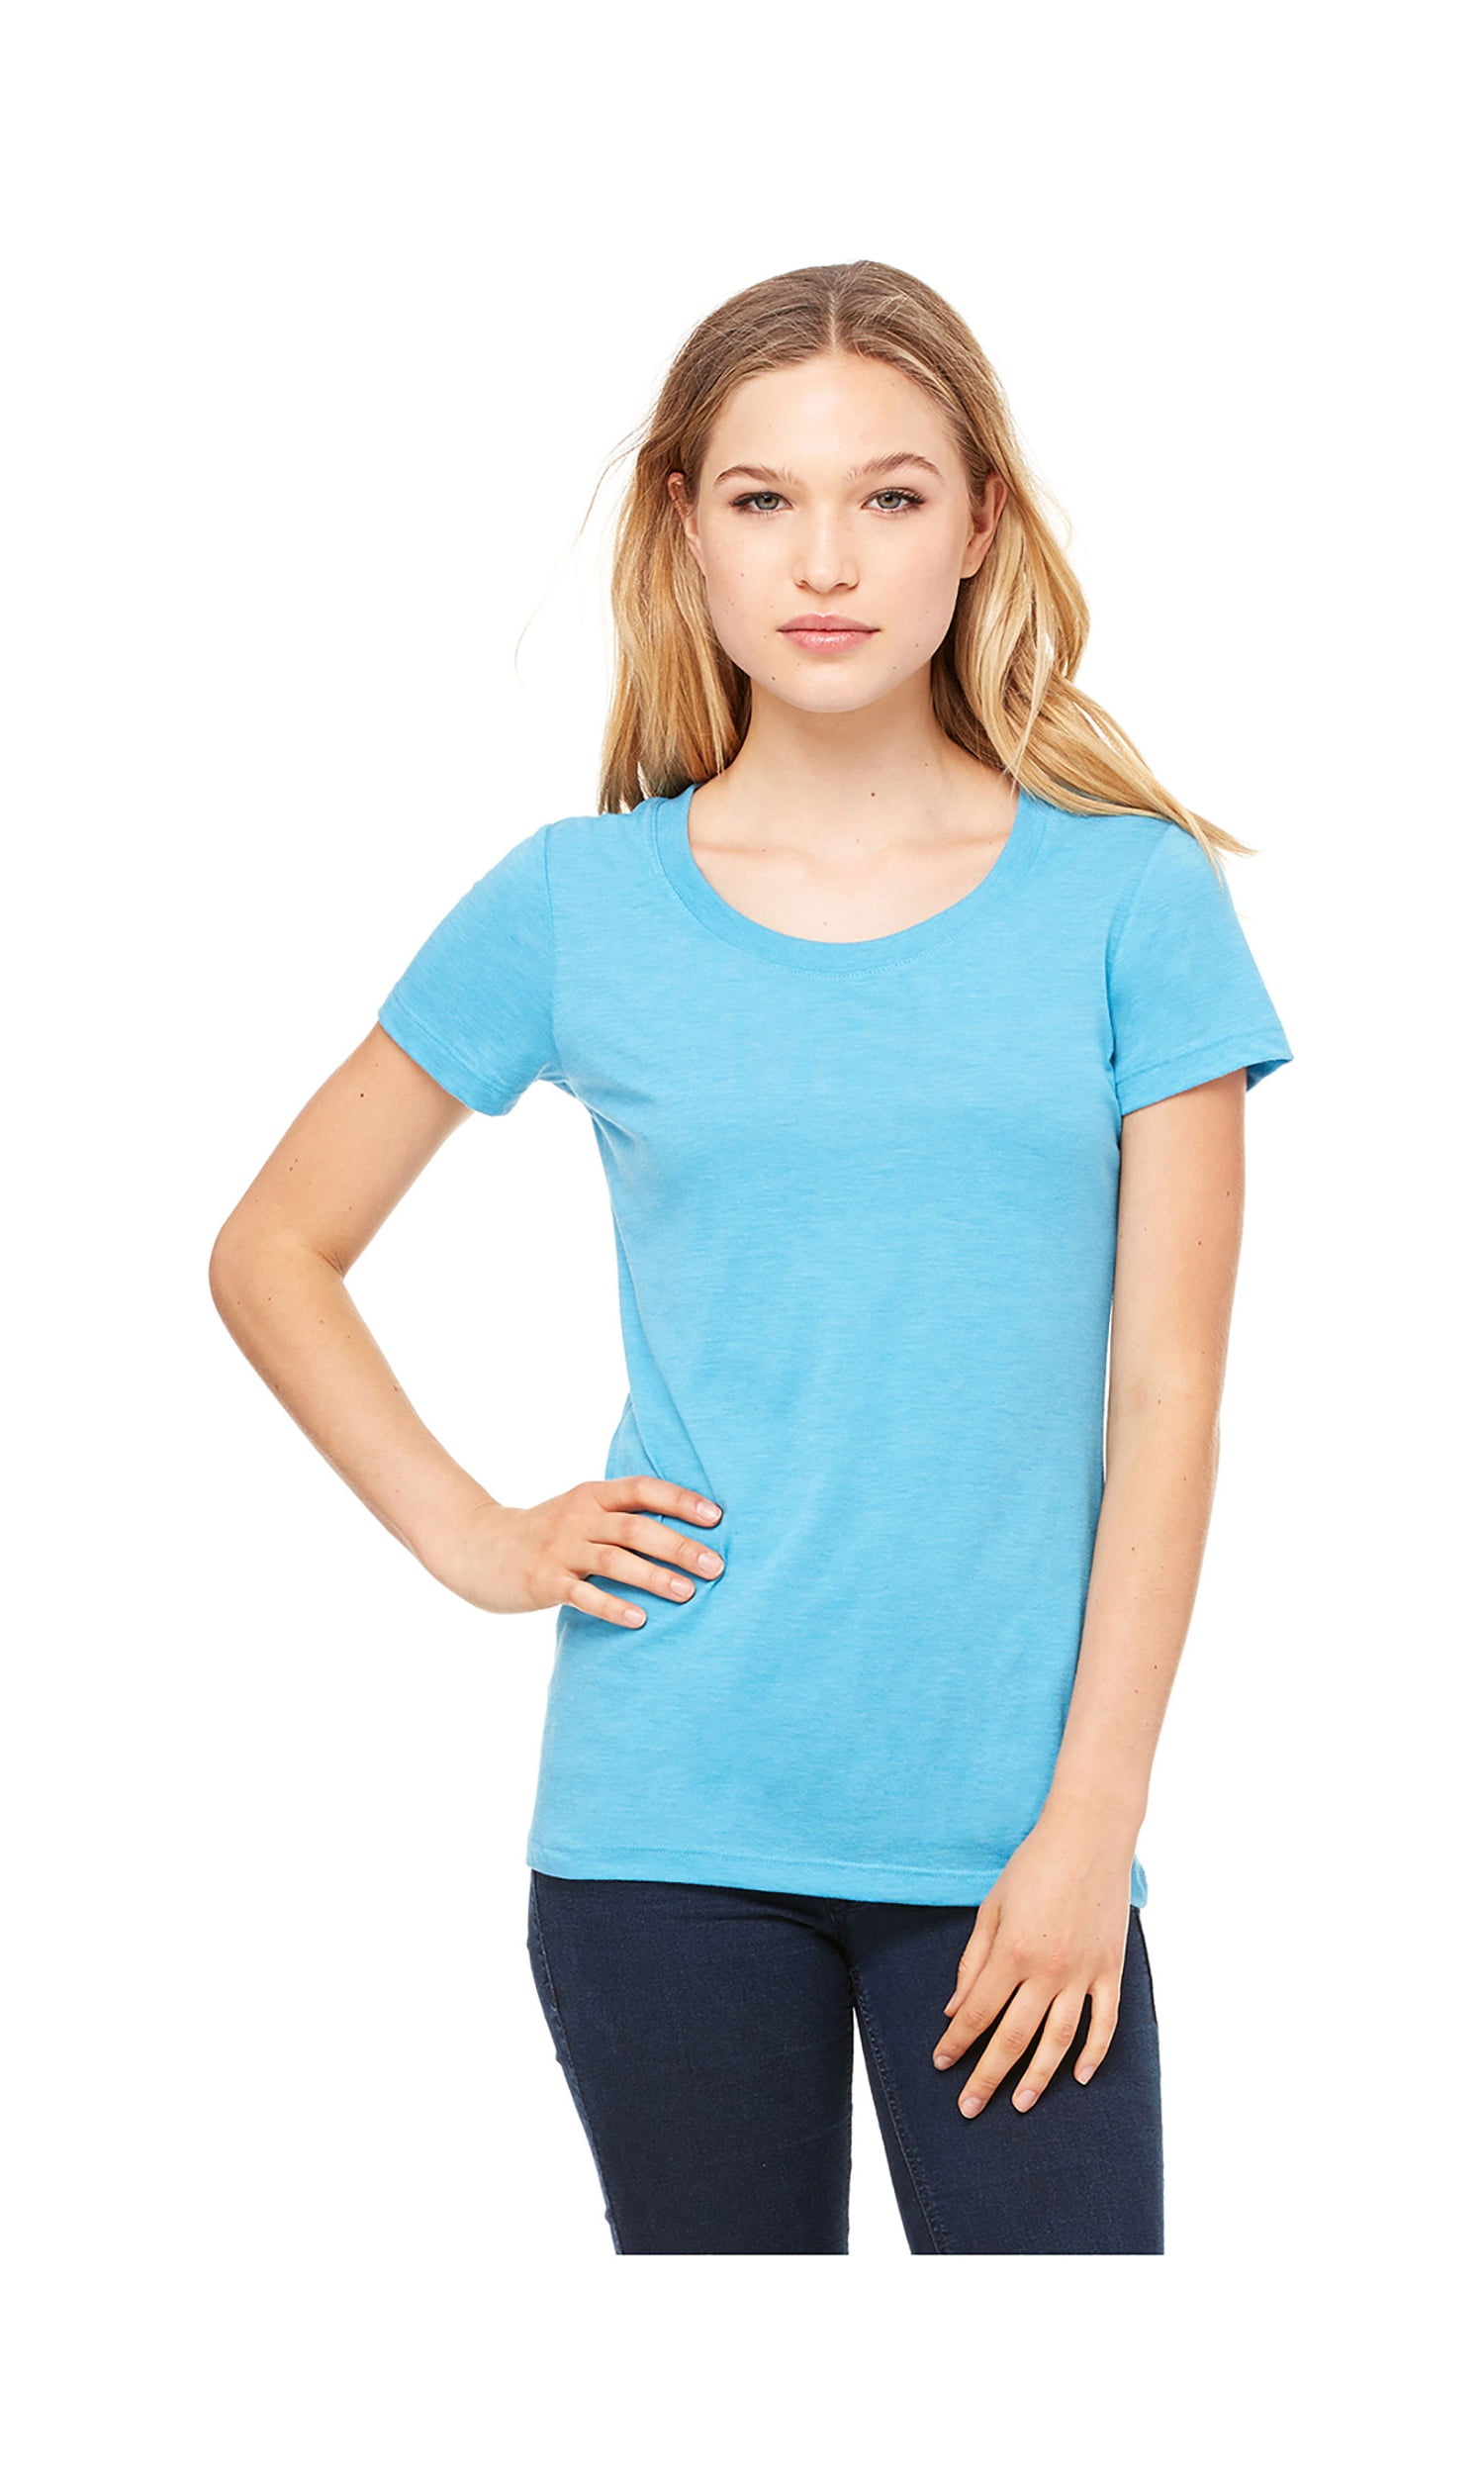 BELLA+CANVAS - Bella Canvas Women's Semi Relaxed Fit T-Shirt, Style ...